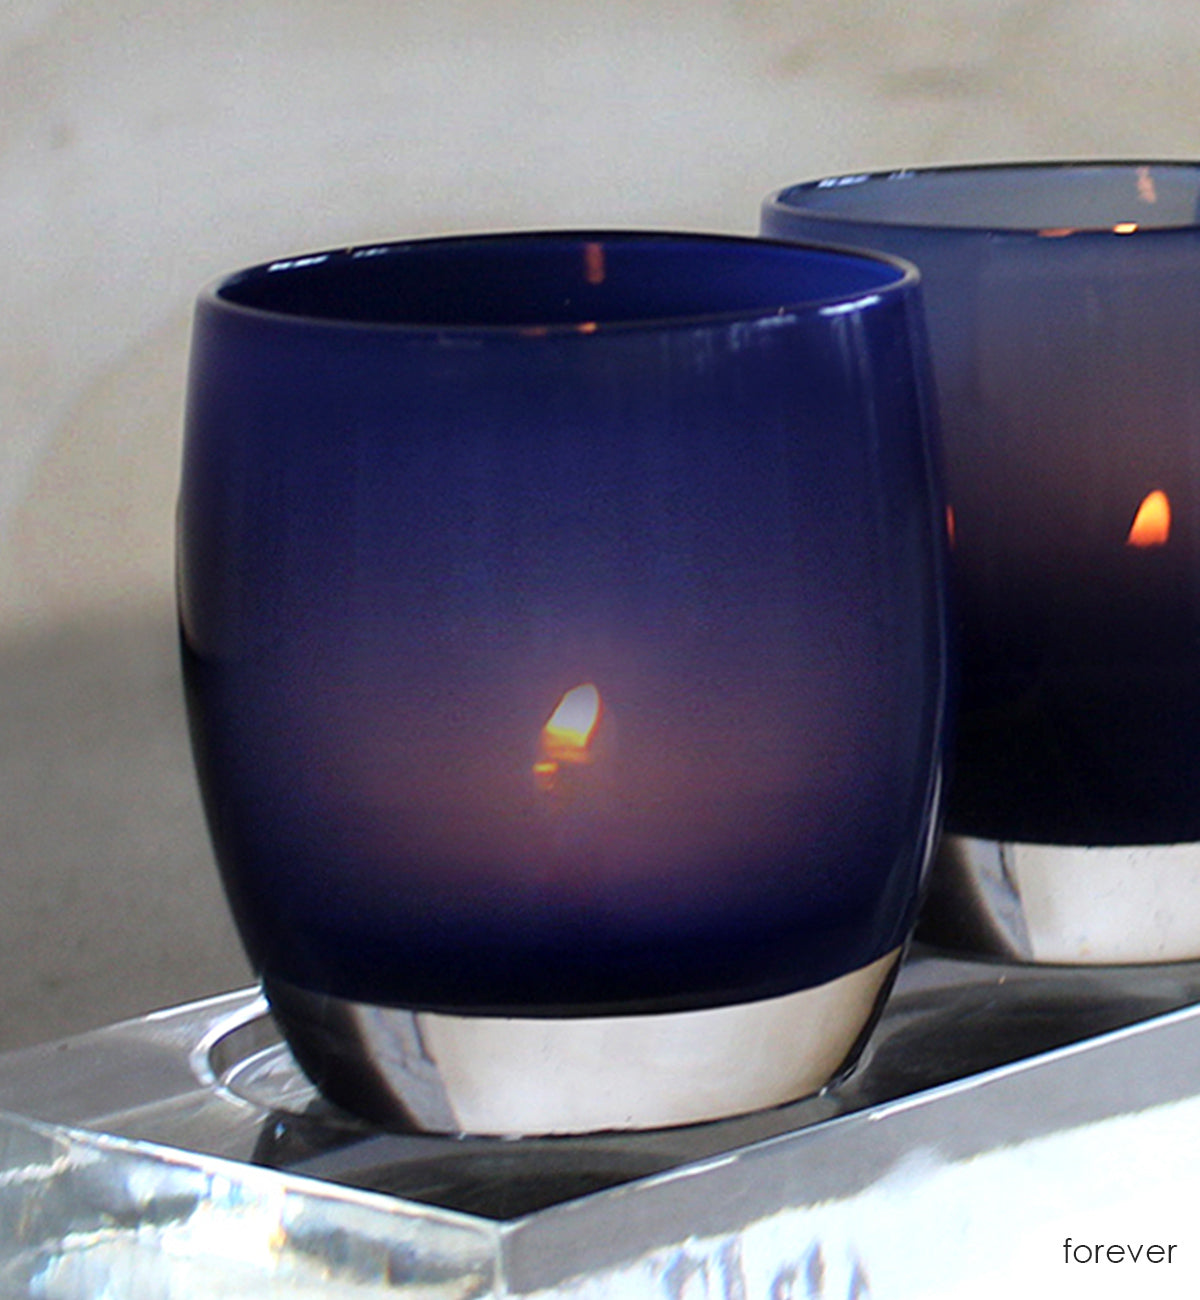 two forever deep navy blue hand-blown glass votive candle holders lit on a square acrylic babystand.